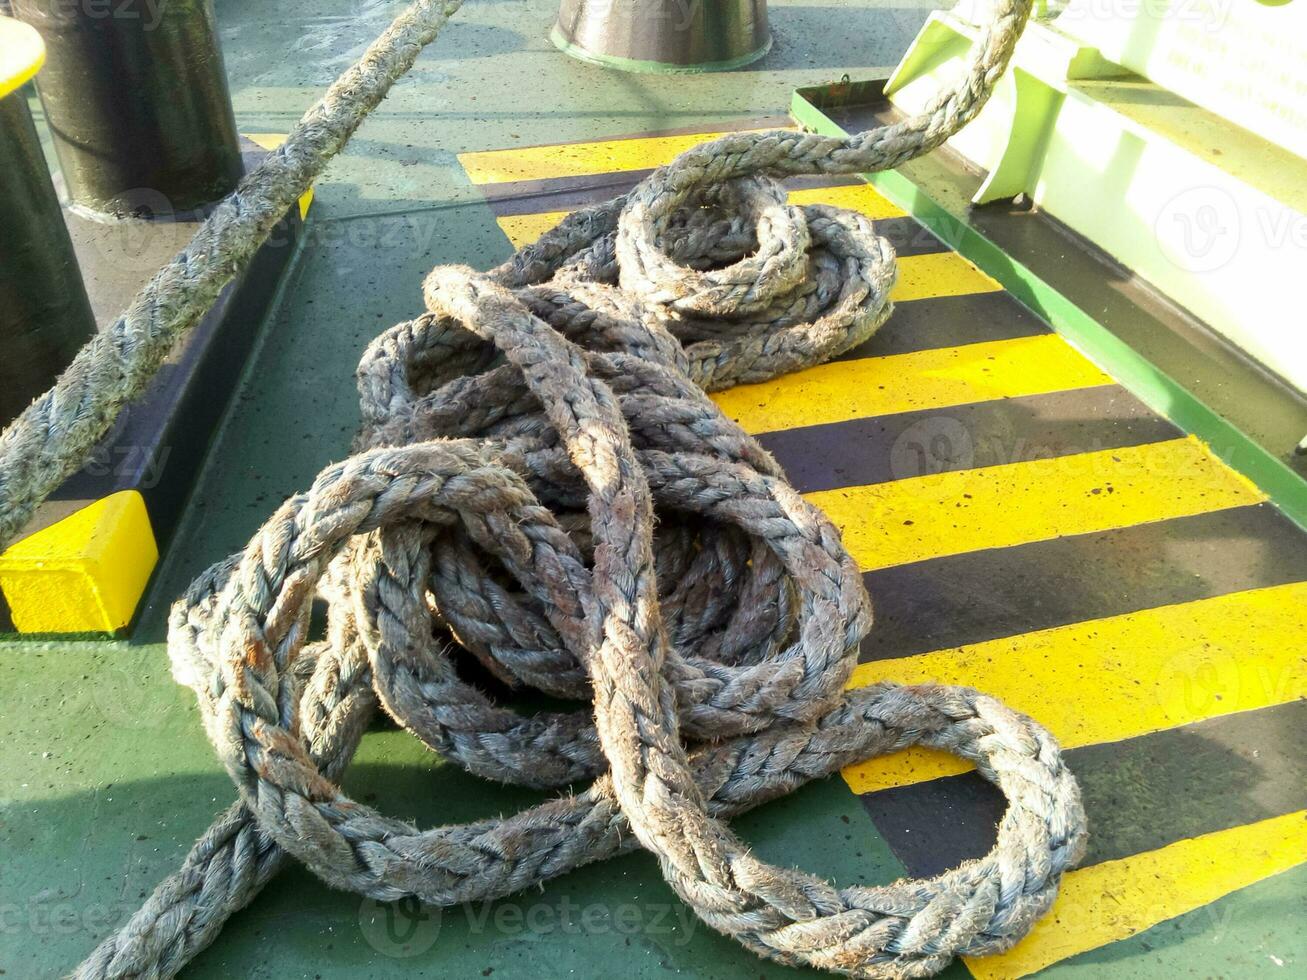 The sea rope on the deck of the ship photo